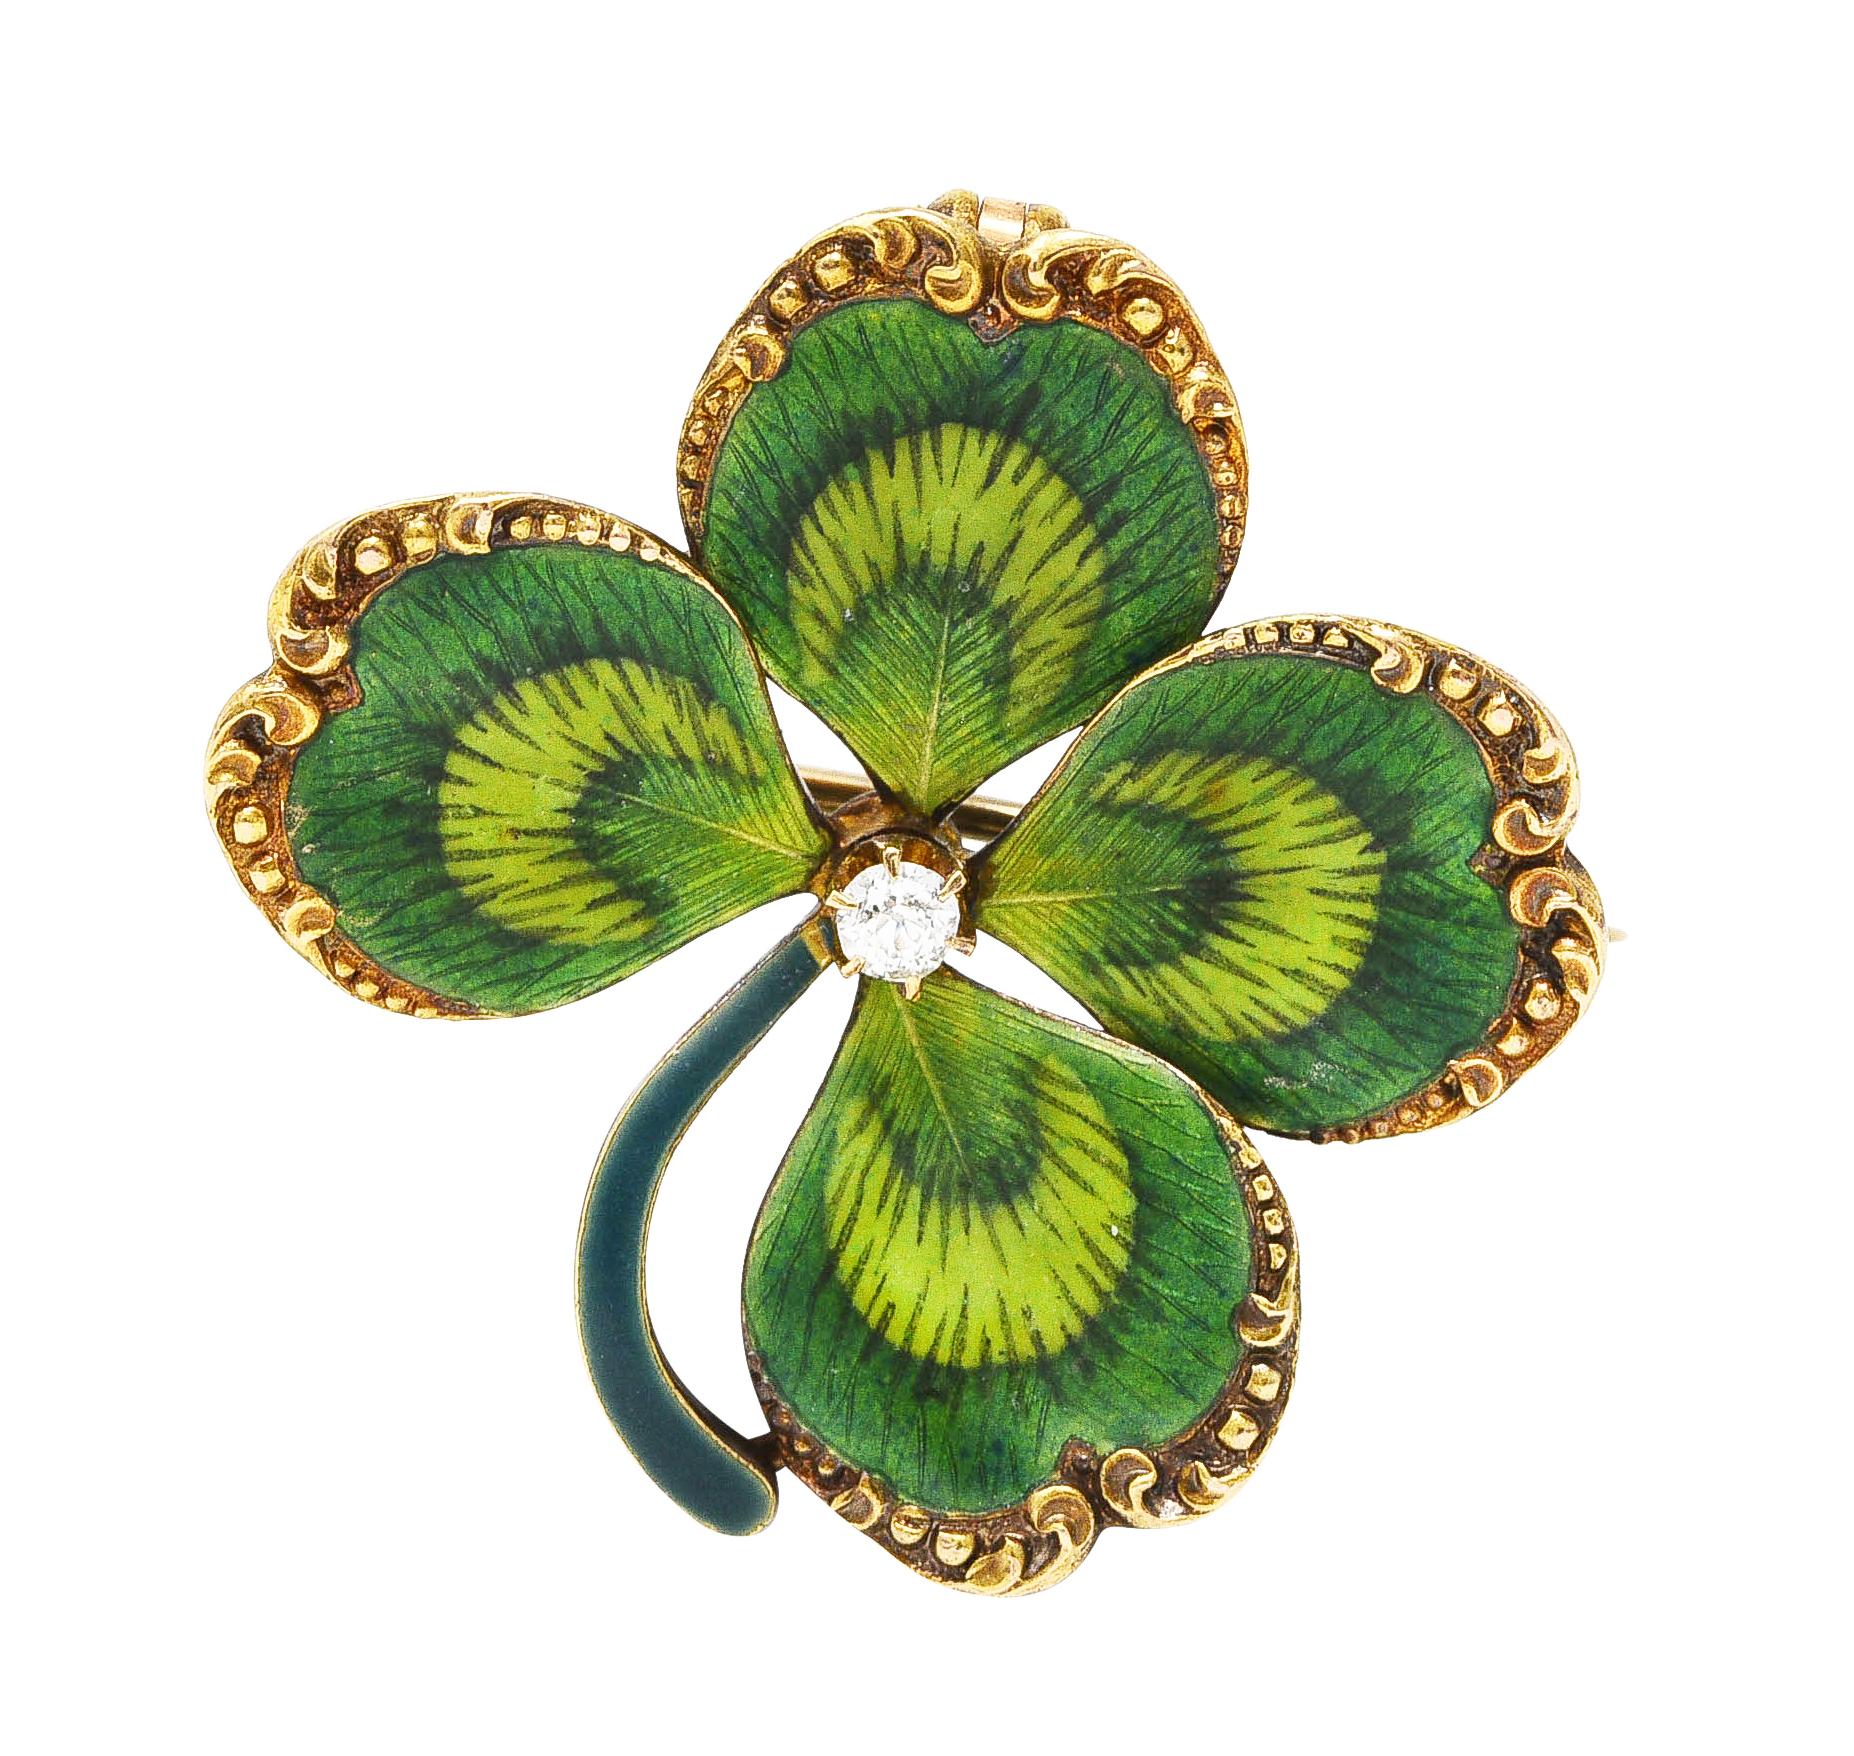 Designed as a highly rendered four leaf clover featuring grooved scroll motif edges and basse-taille enamel. Transparent matte dark green with linear vein-like engraving and opaque light green mid-section. With opaque blueish-green enamel stem -